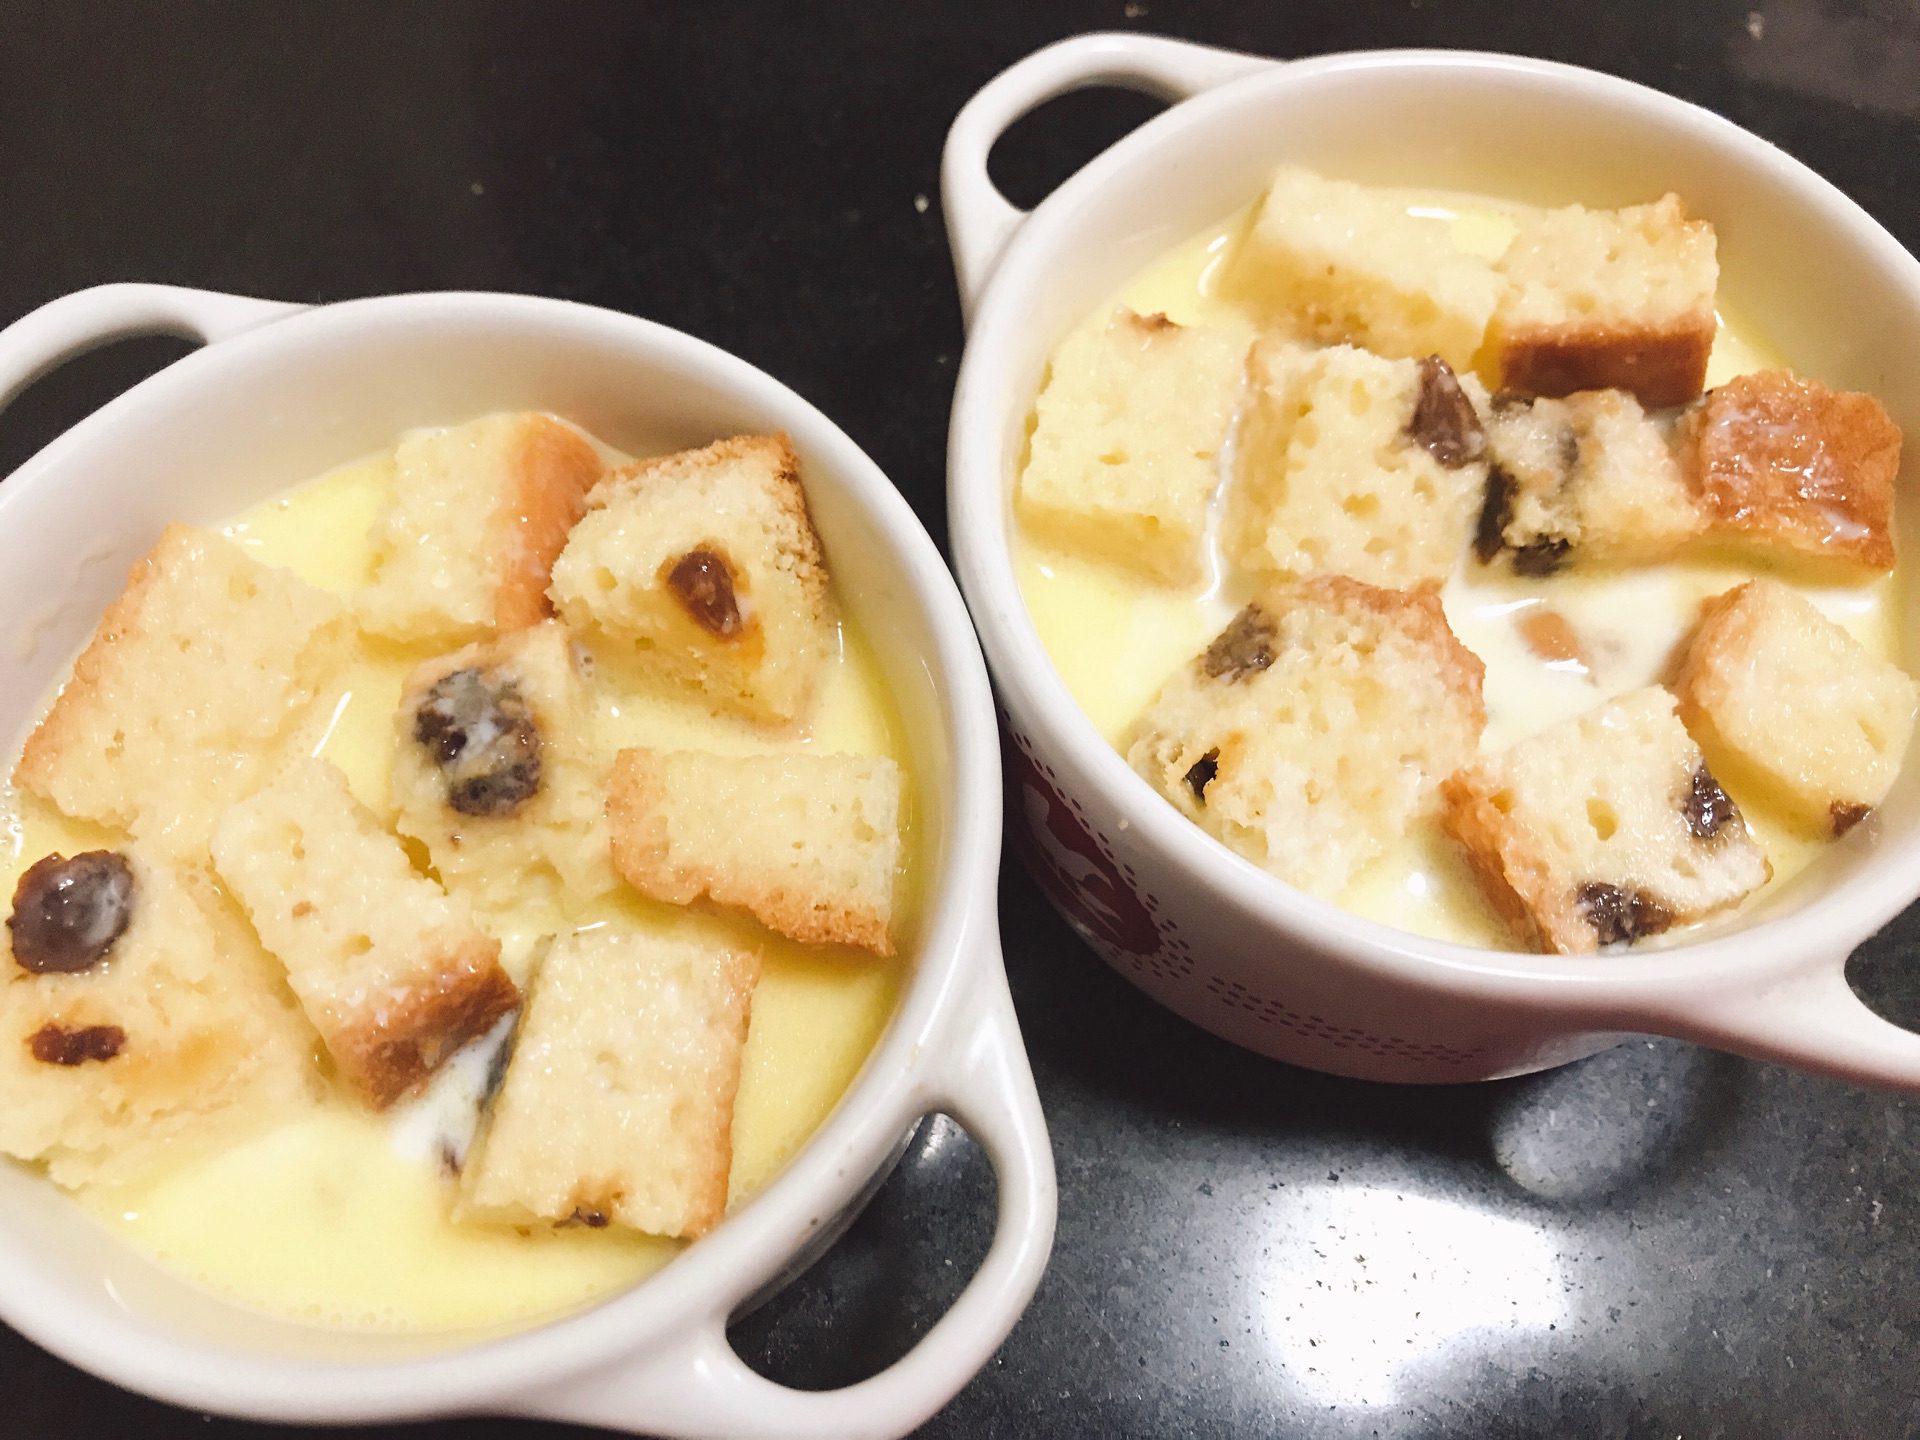 Super delicious toast pudding baby favorite simple and quick breakfast recipe steps